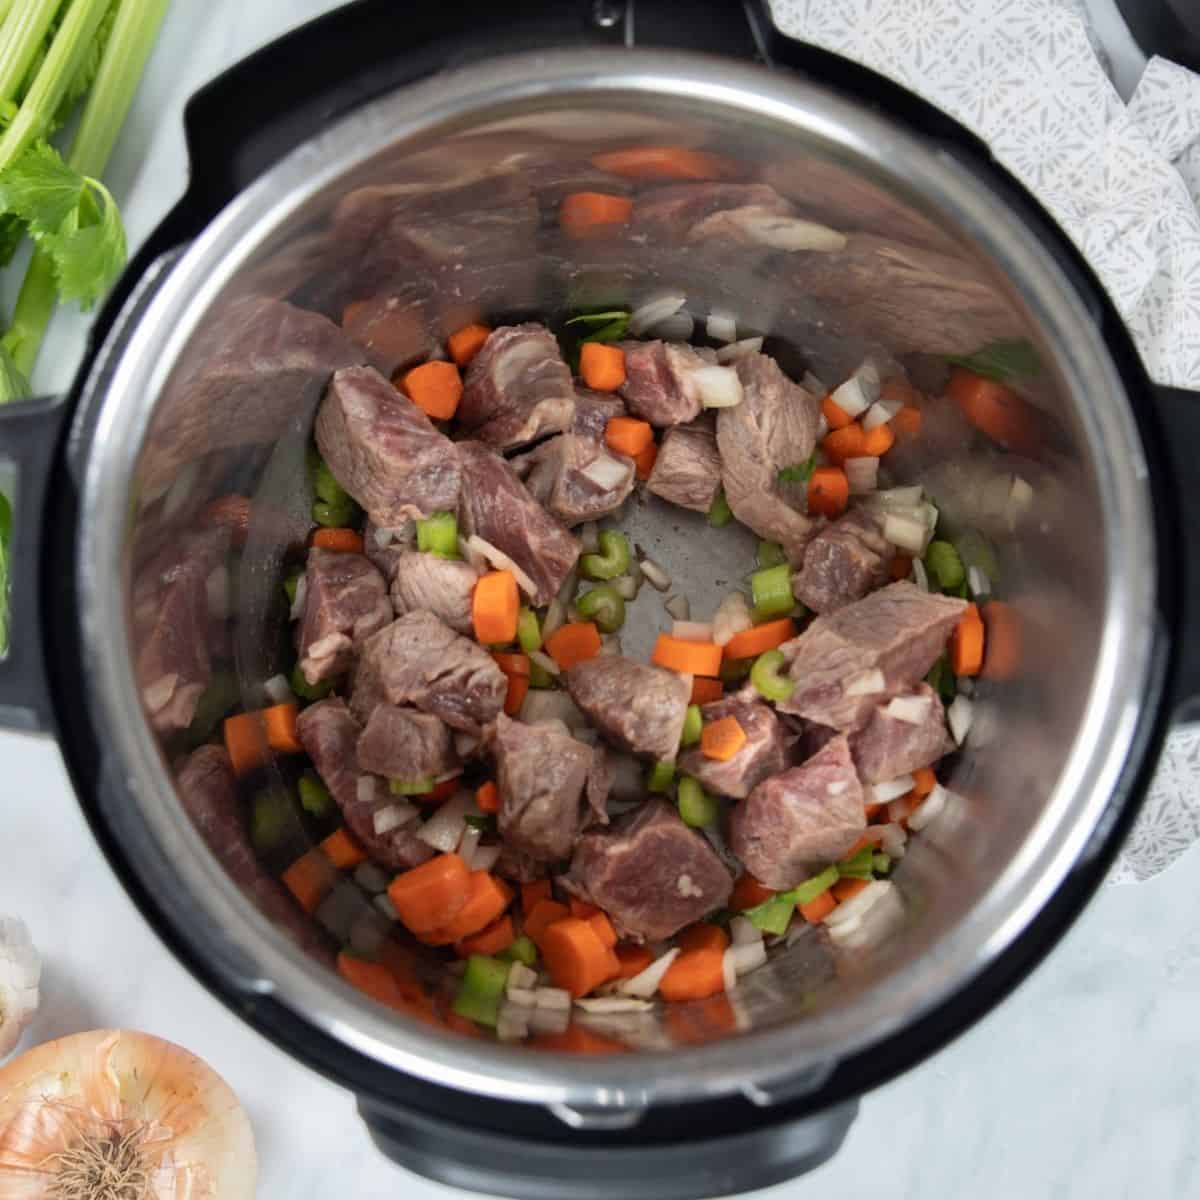 Beef, onions, celery, and carrots sauteed in the inner pot of the instant pot.